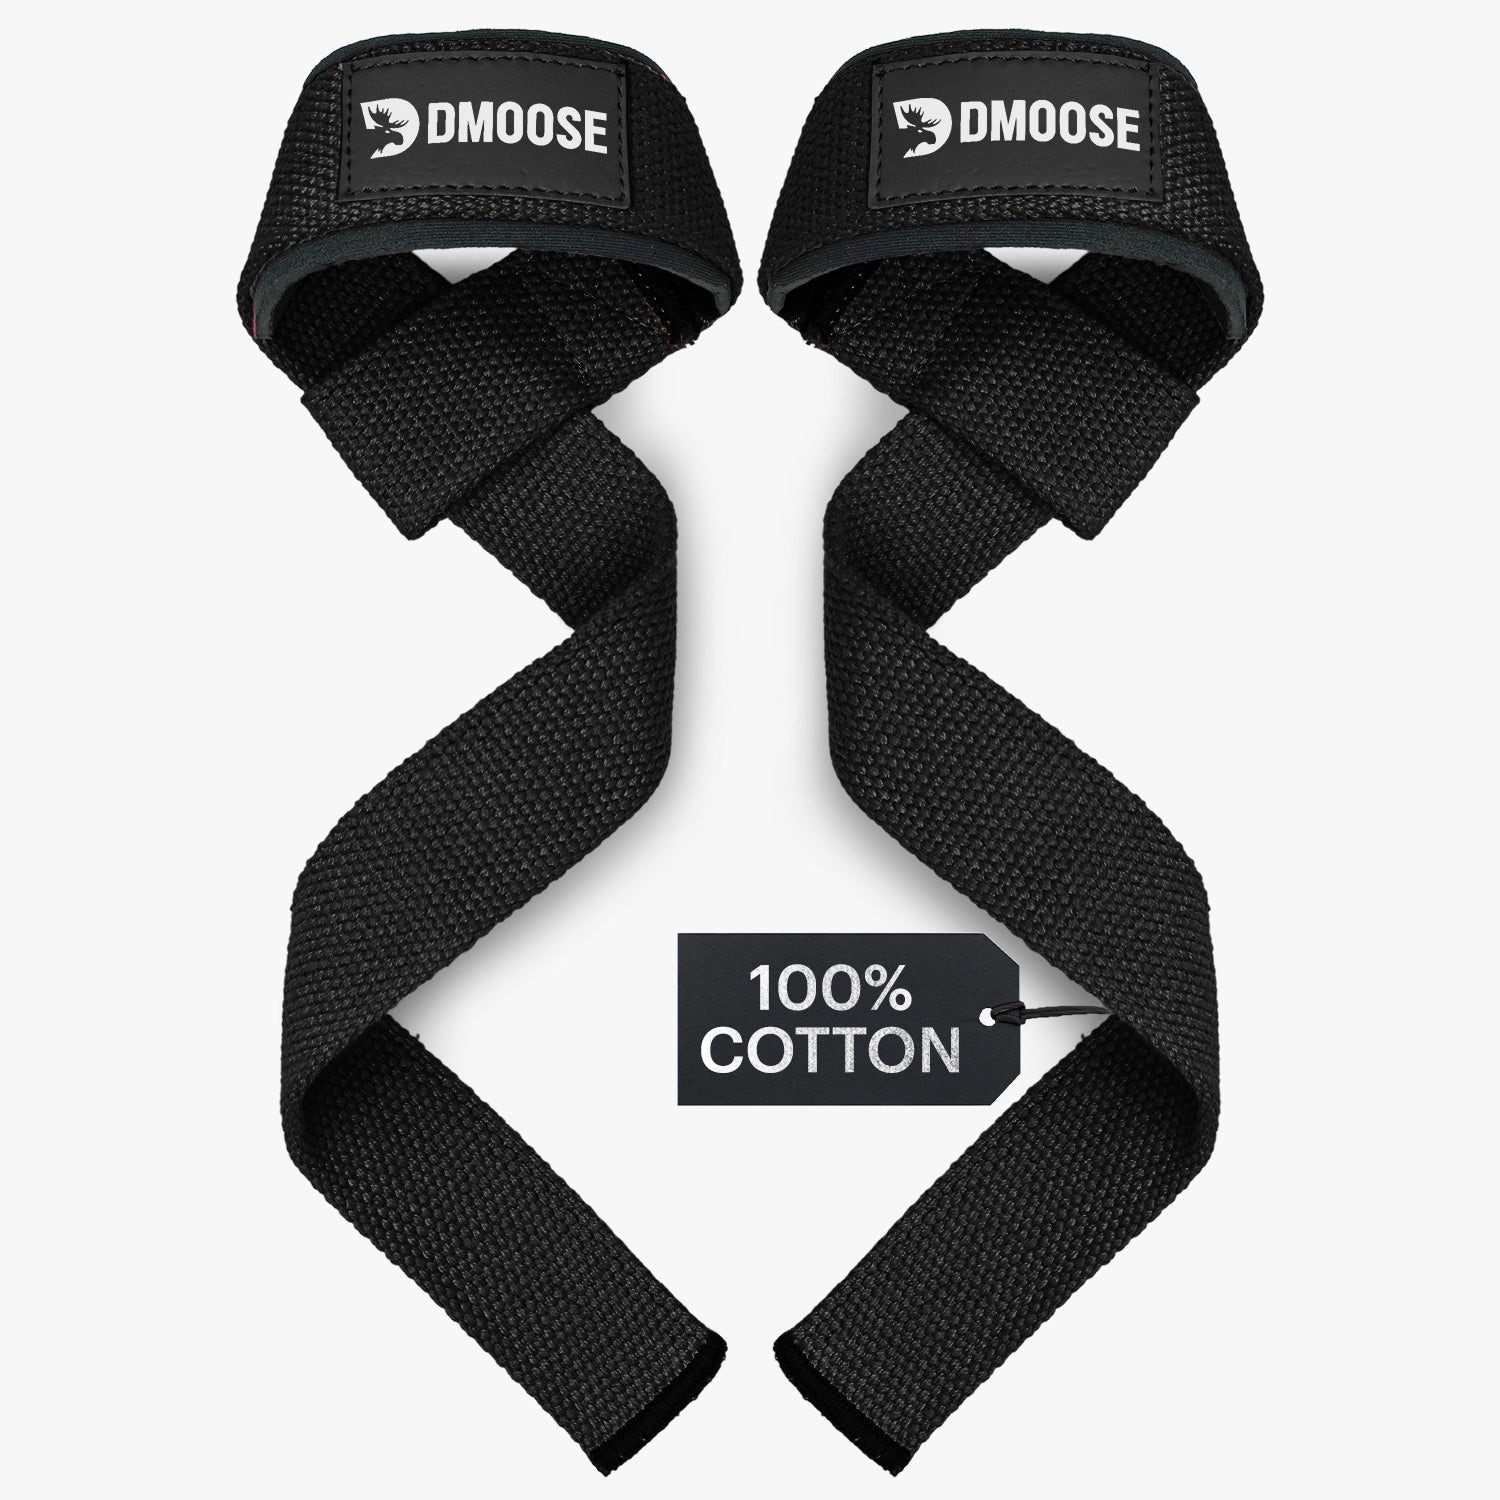 DMoose Lifting Wrist Straps for Weightlifting & Powerlifting